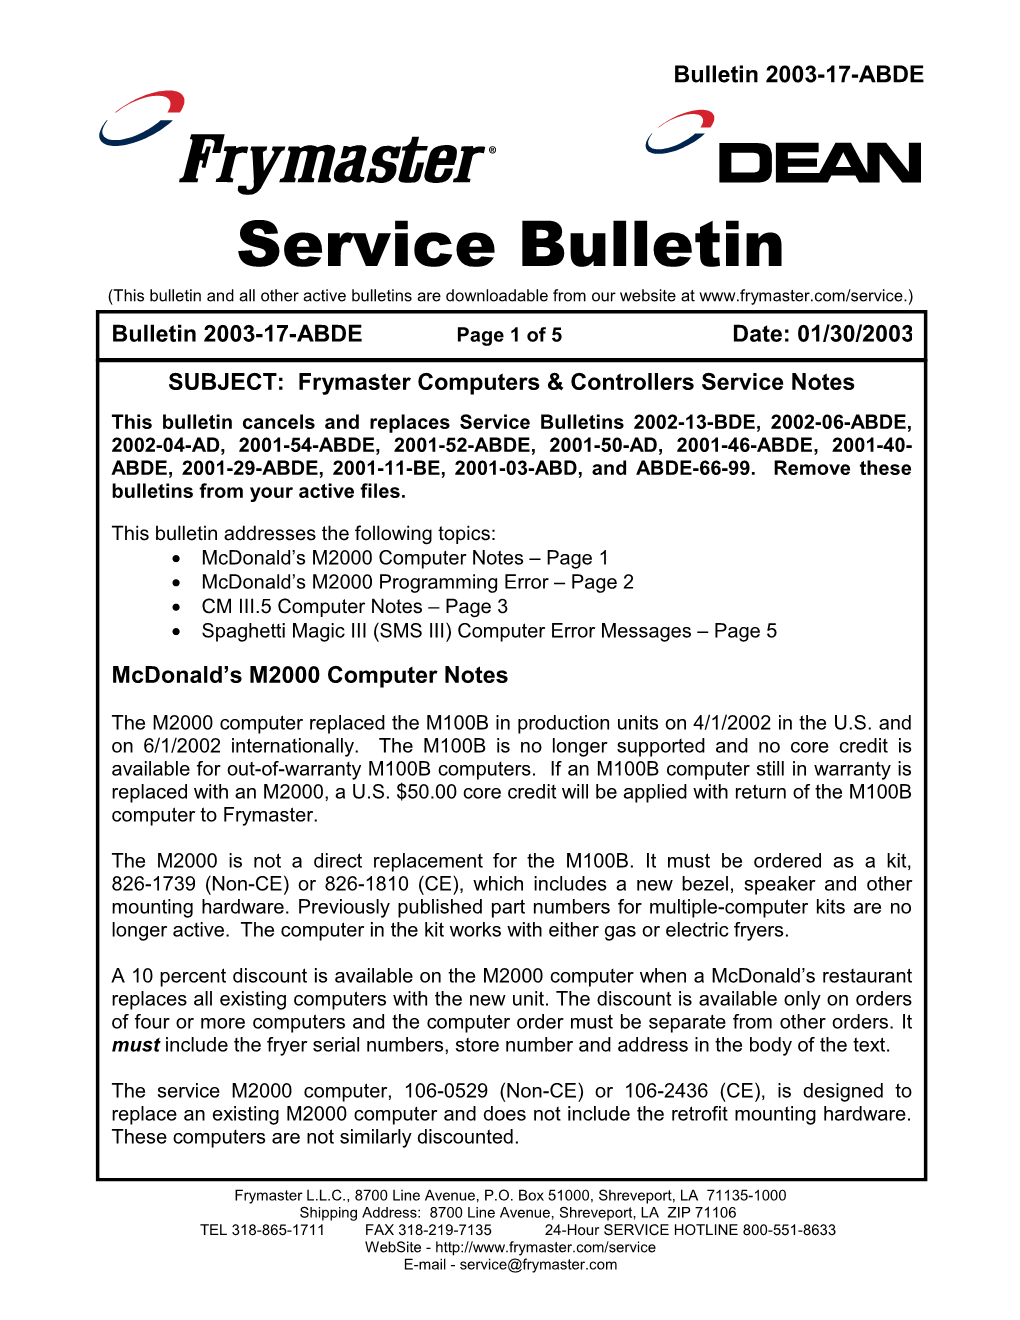 Service Bulletin (This Bulletin and All Other Active Bulletins Are Downloadable from Our Website At